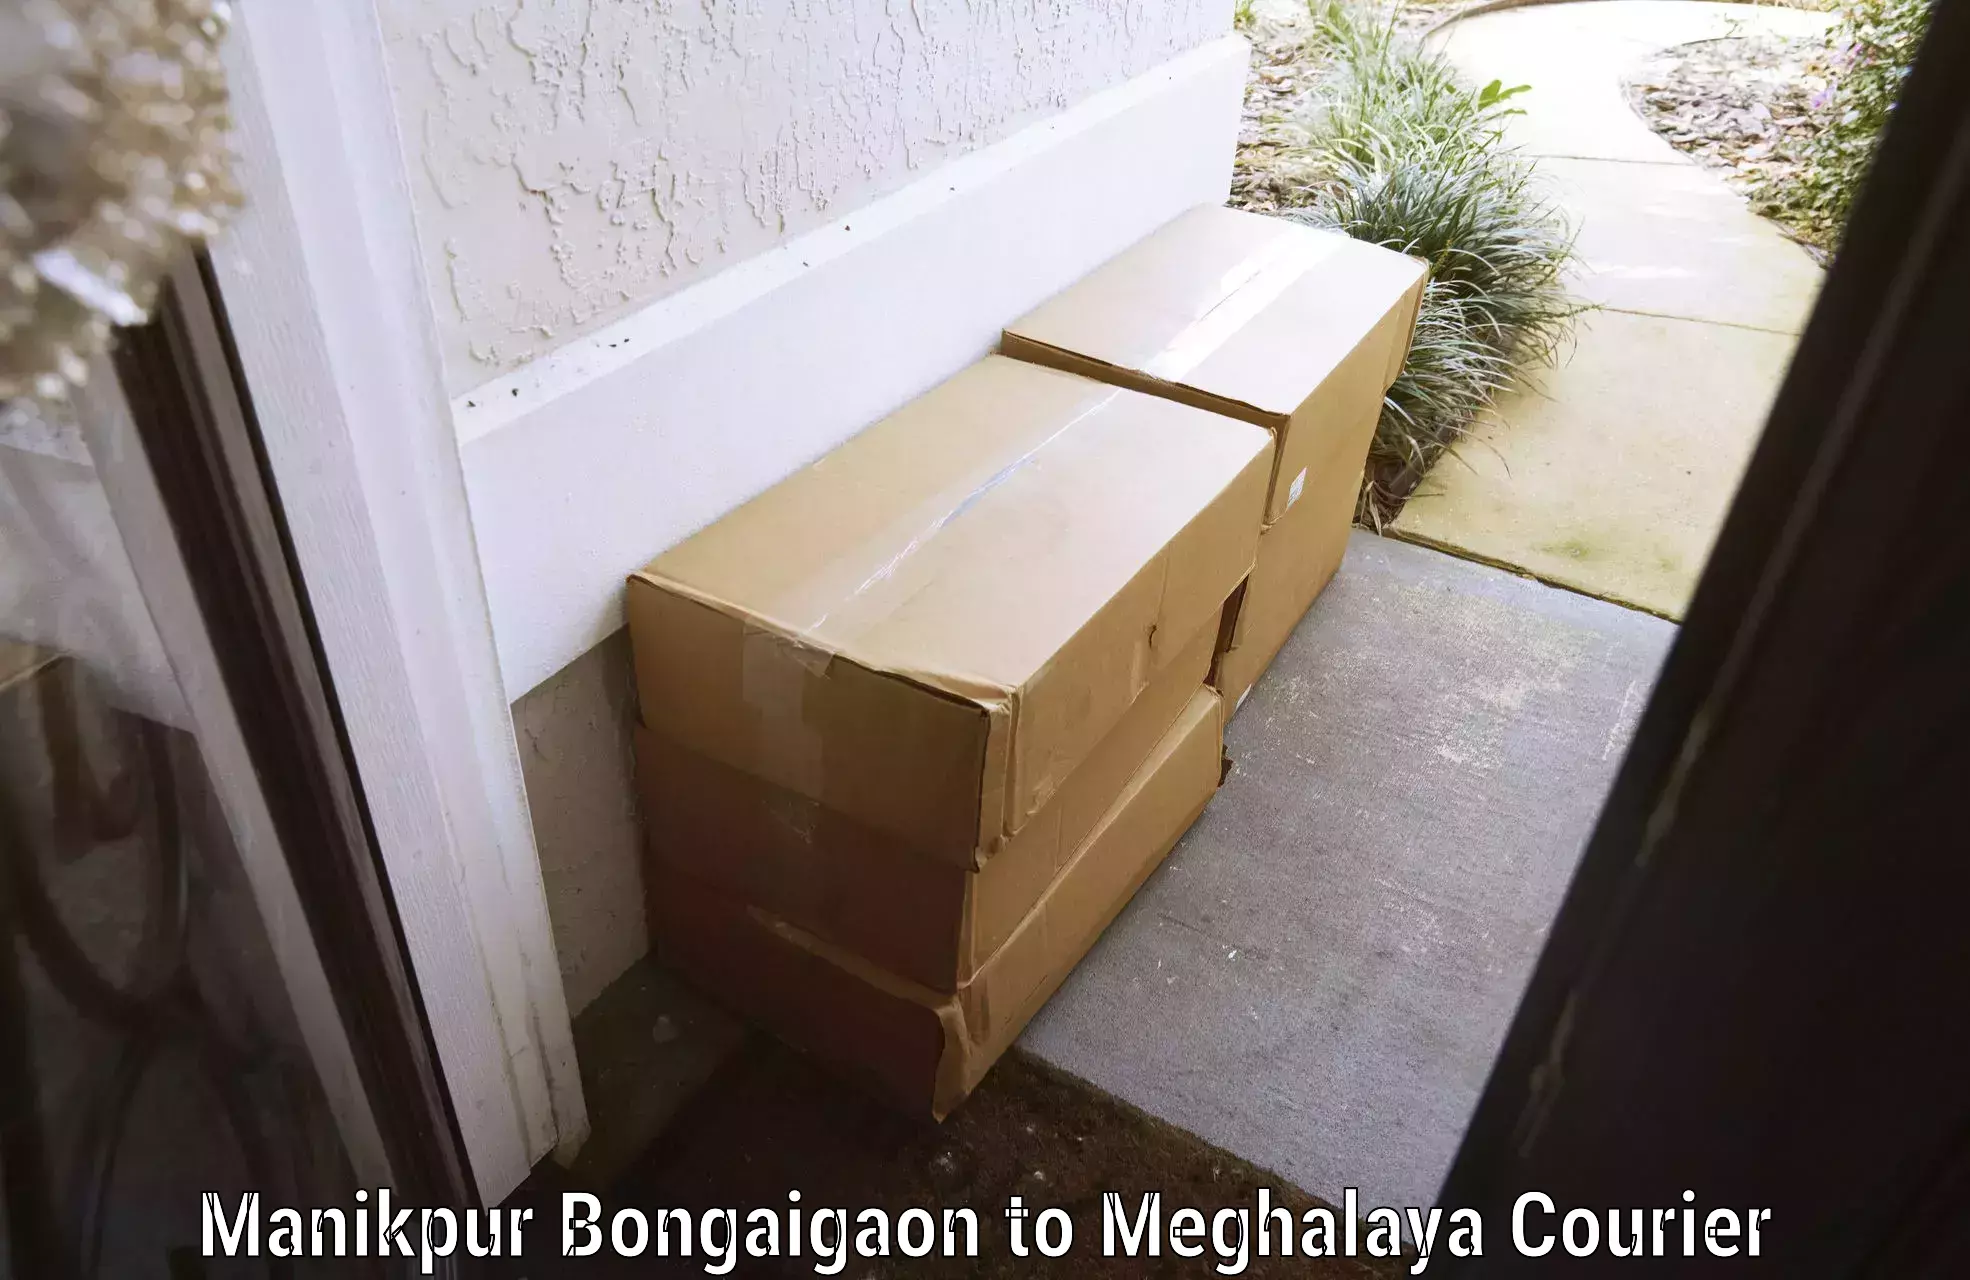 Reliable baggage delivery in Manikpur Bongaigaon to Meghalaya